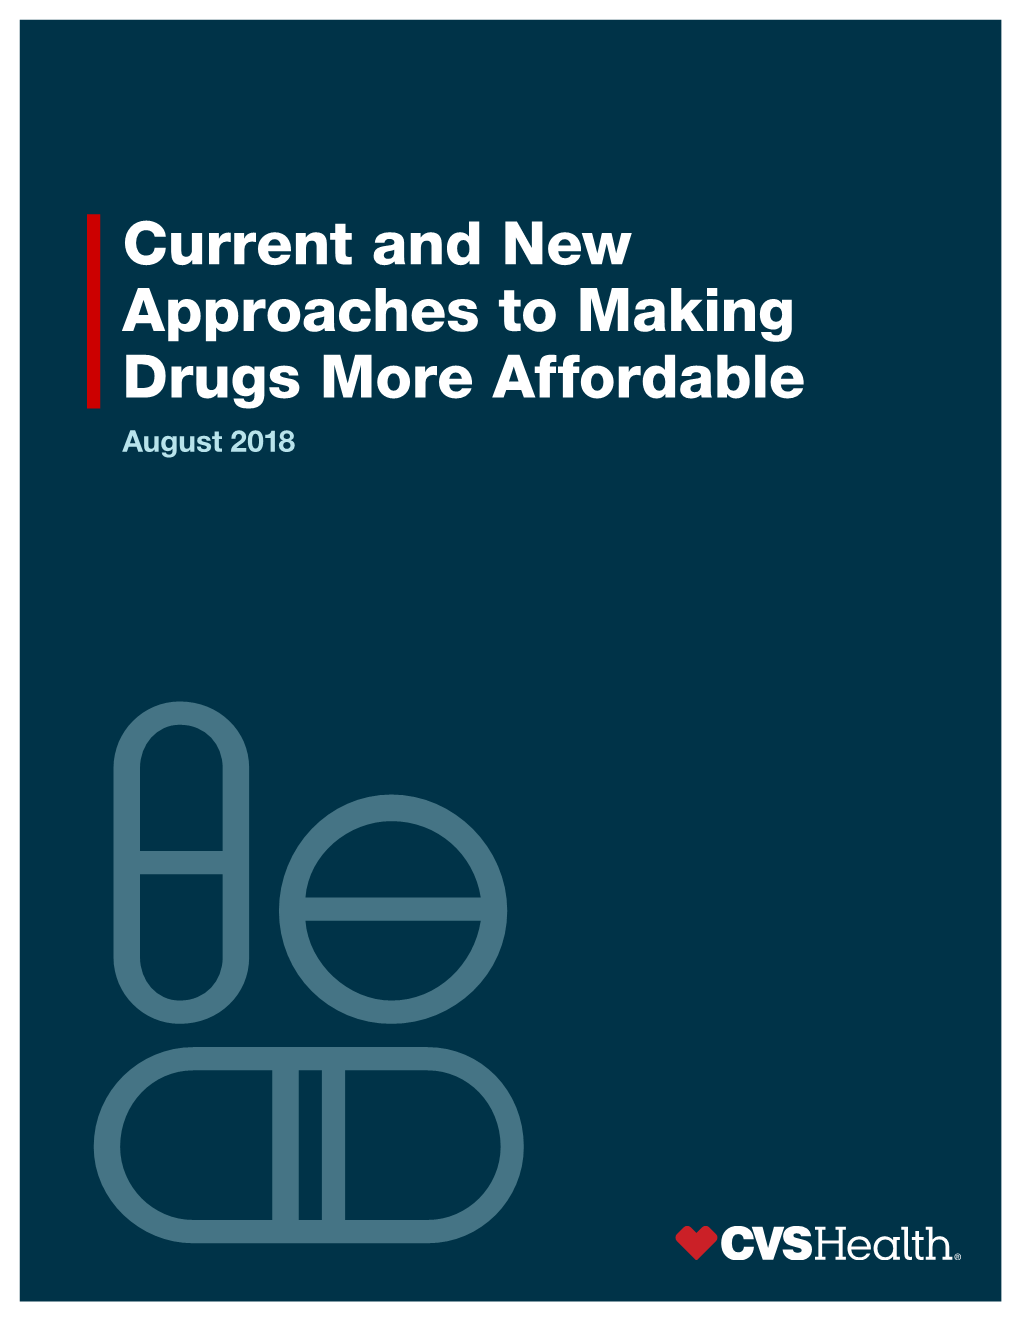 Current and New Approaches to Making Drugs More Affordable